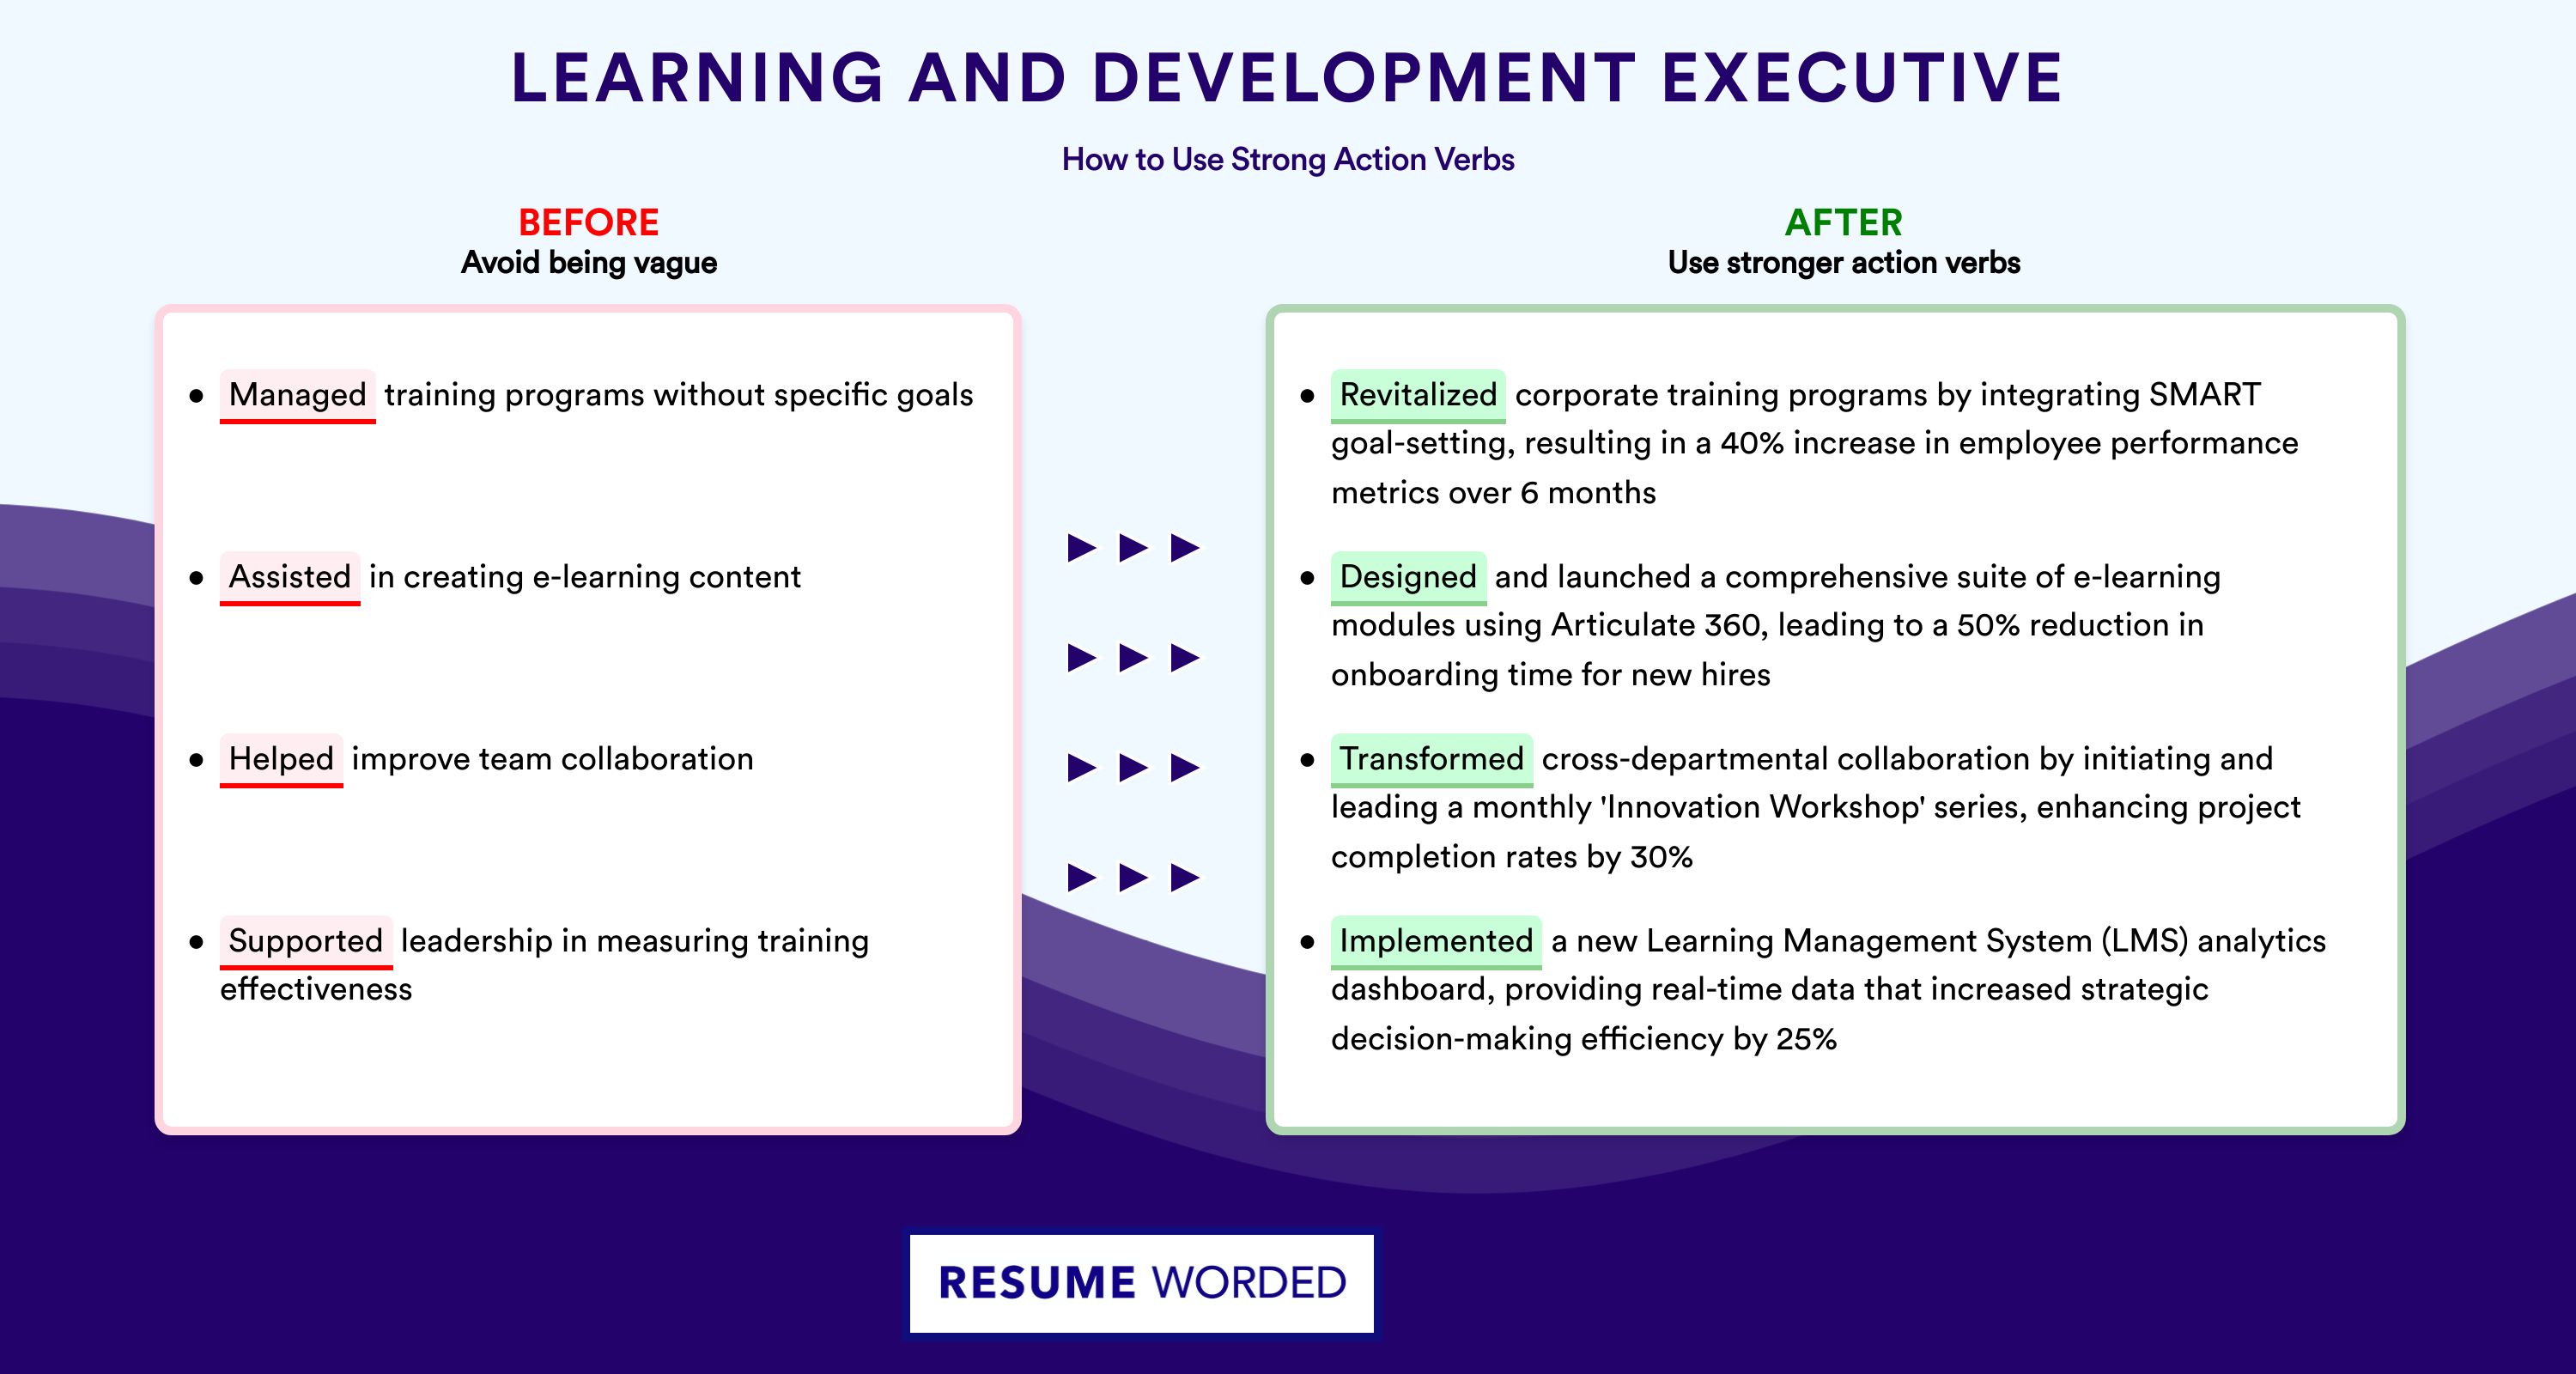 Action Verbs for Learning and Development Executive